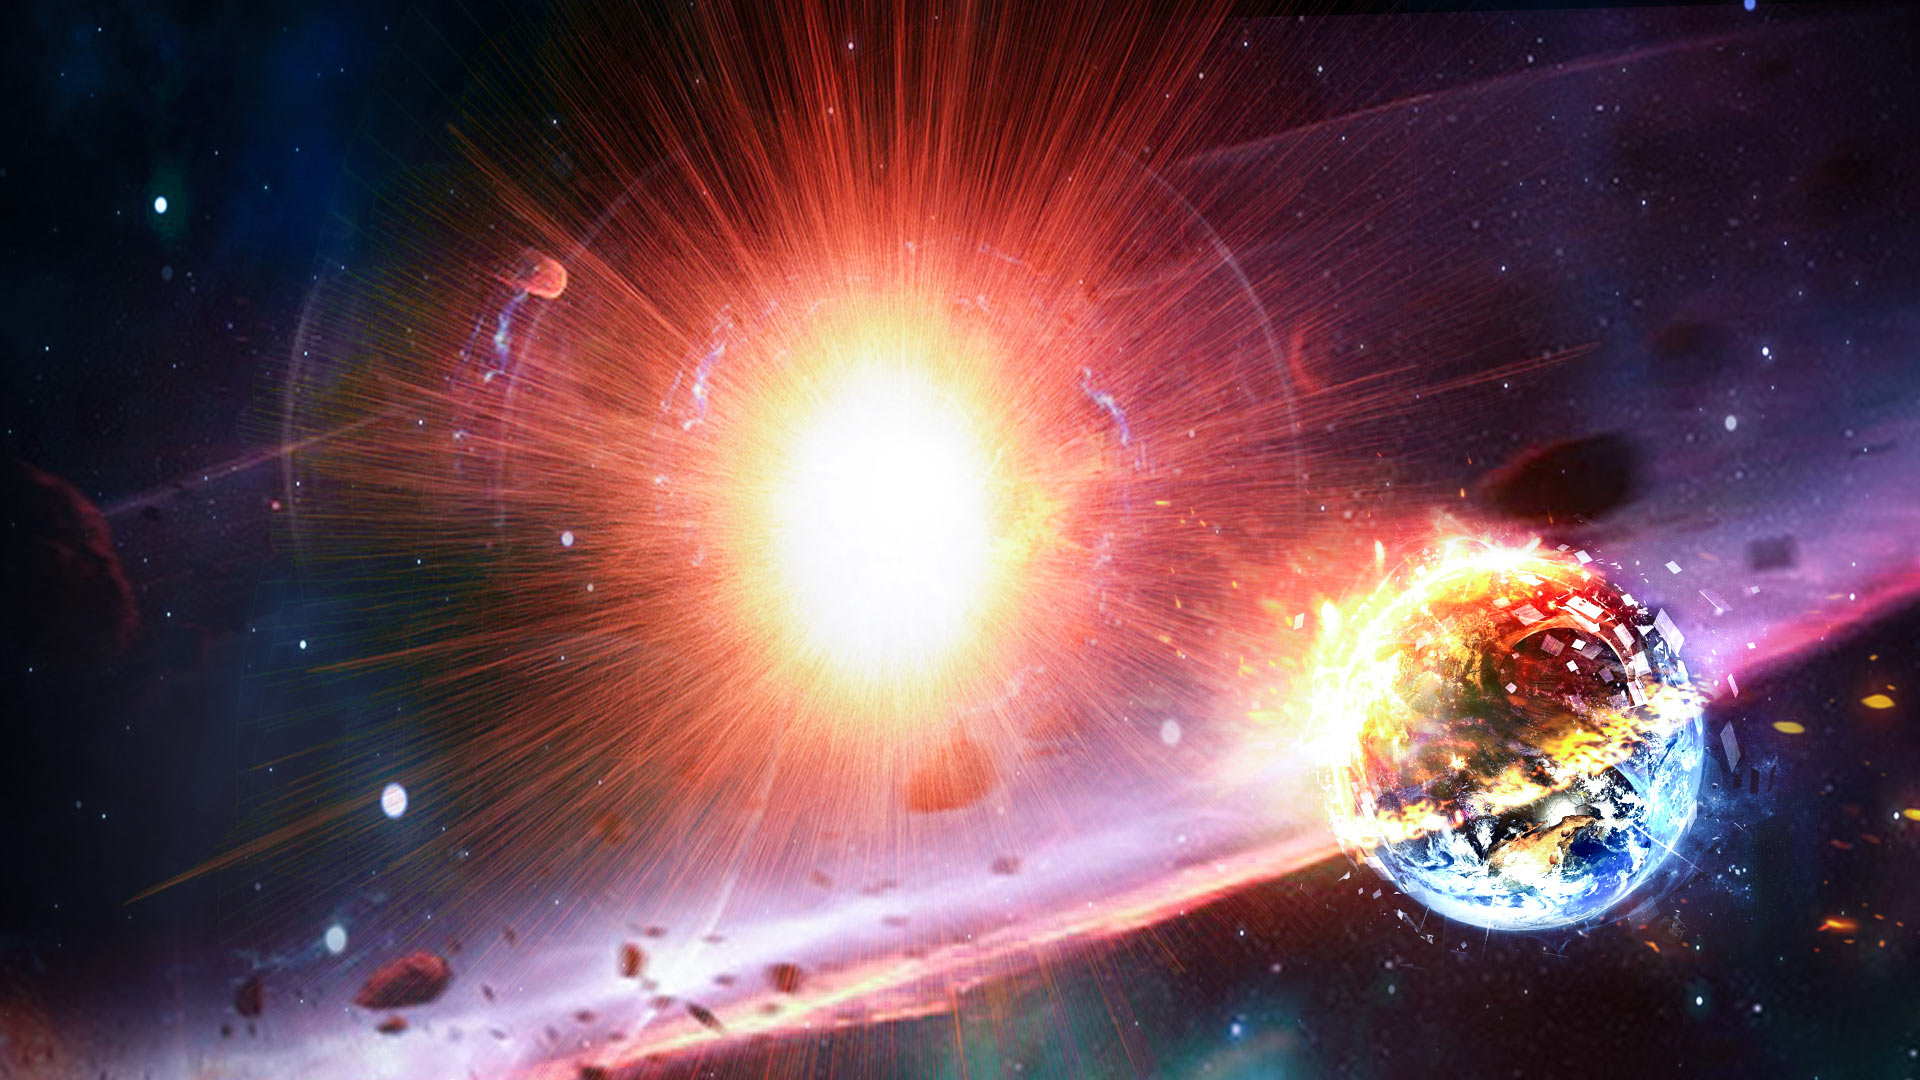 What If a Supernova Exploded Close to Earth? | What If Show